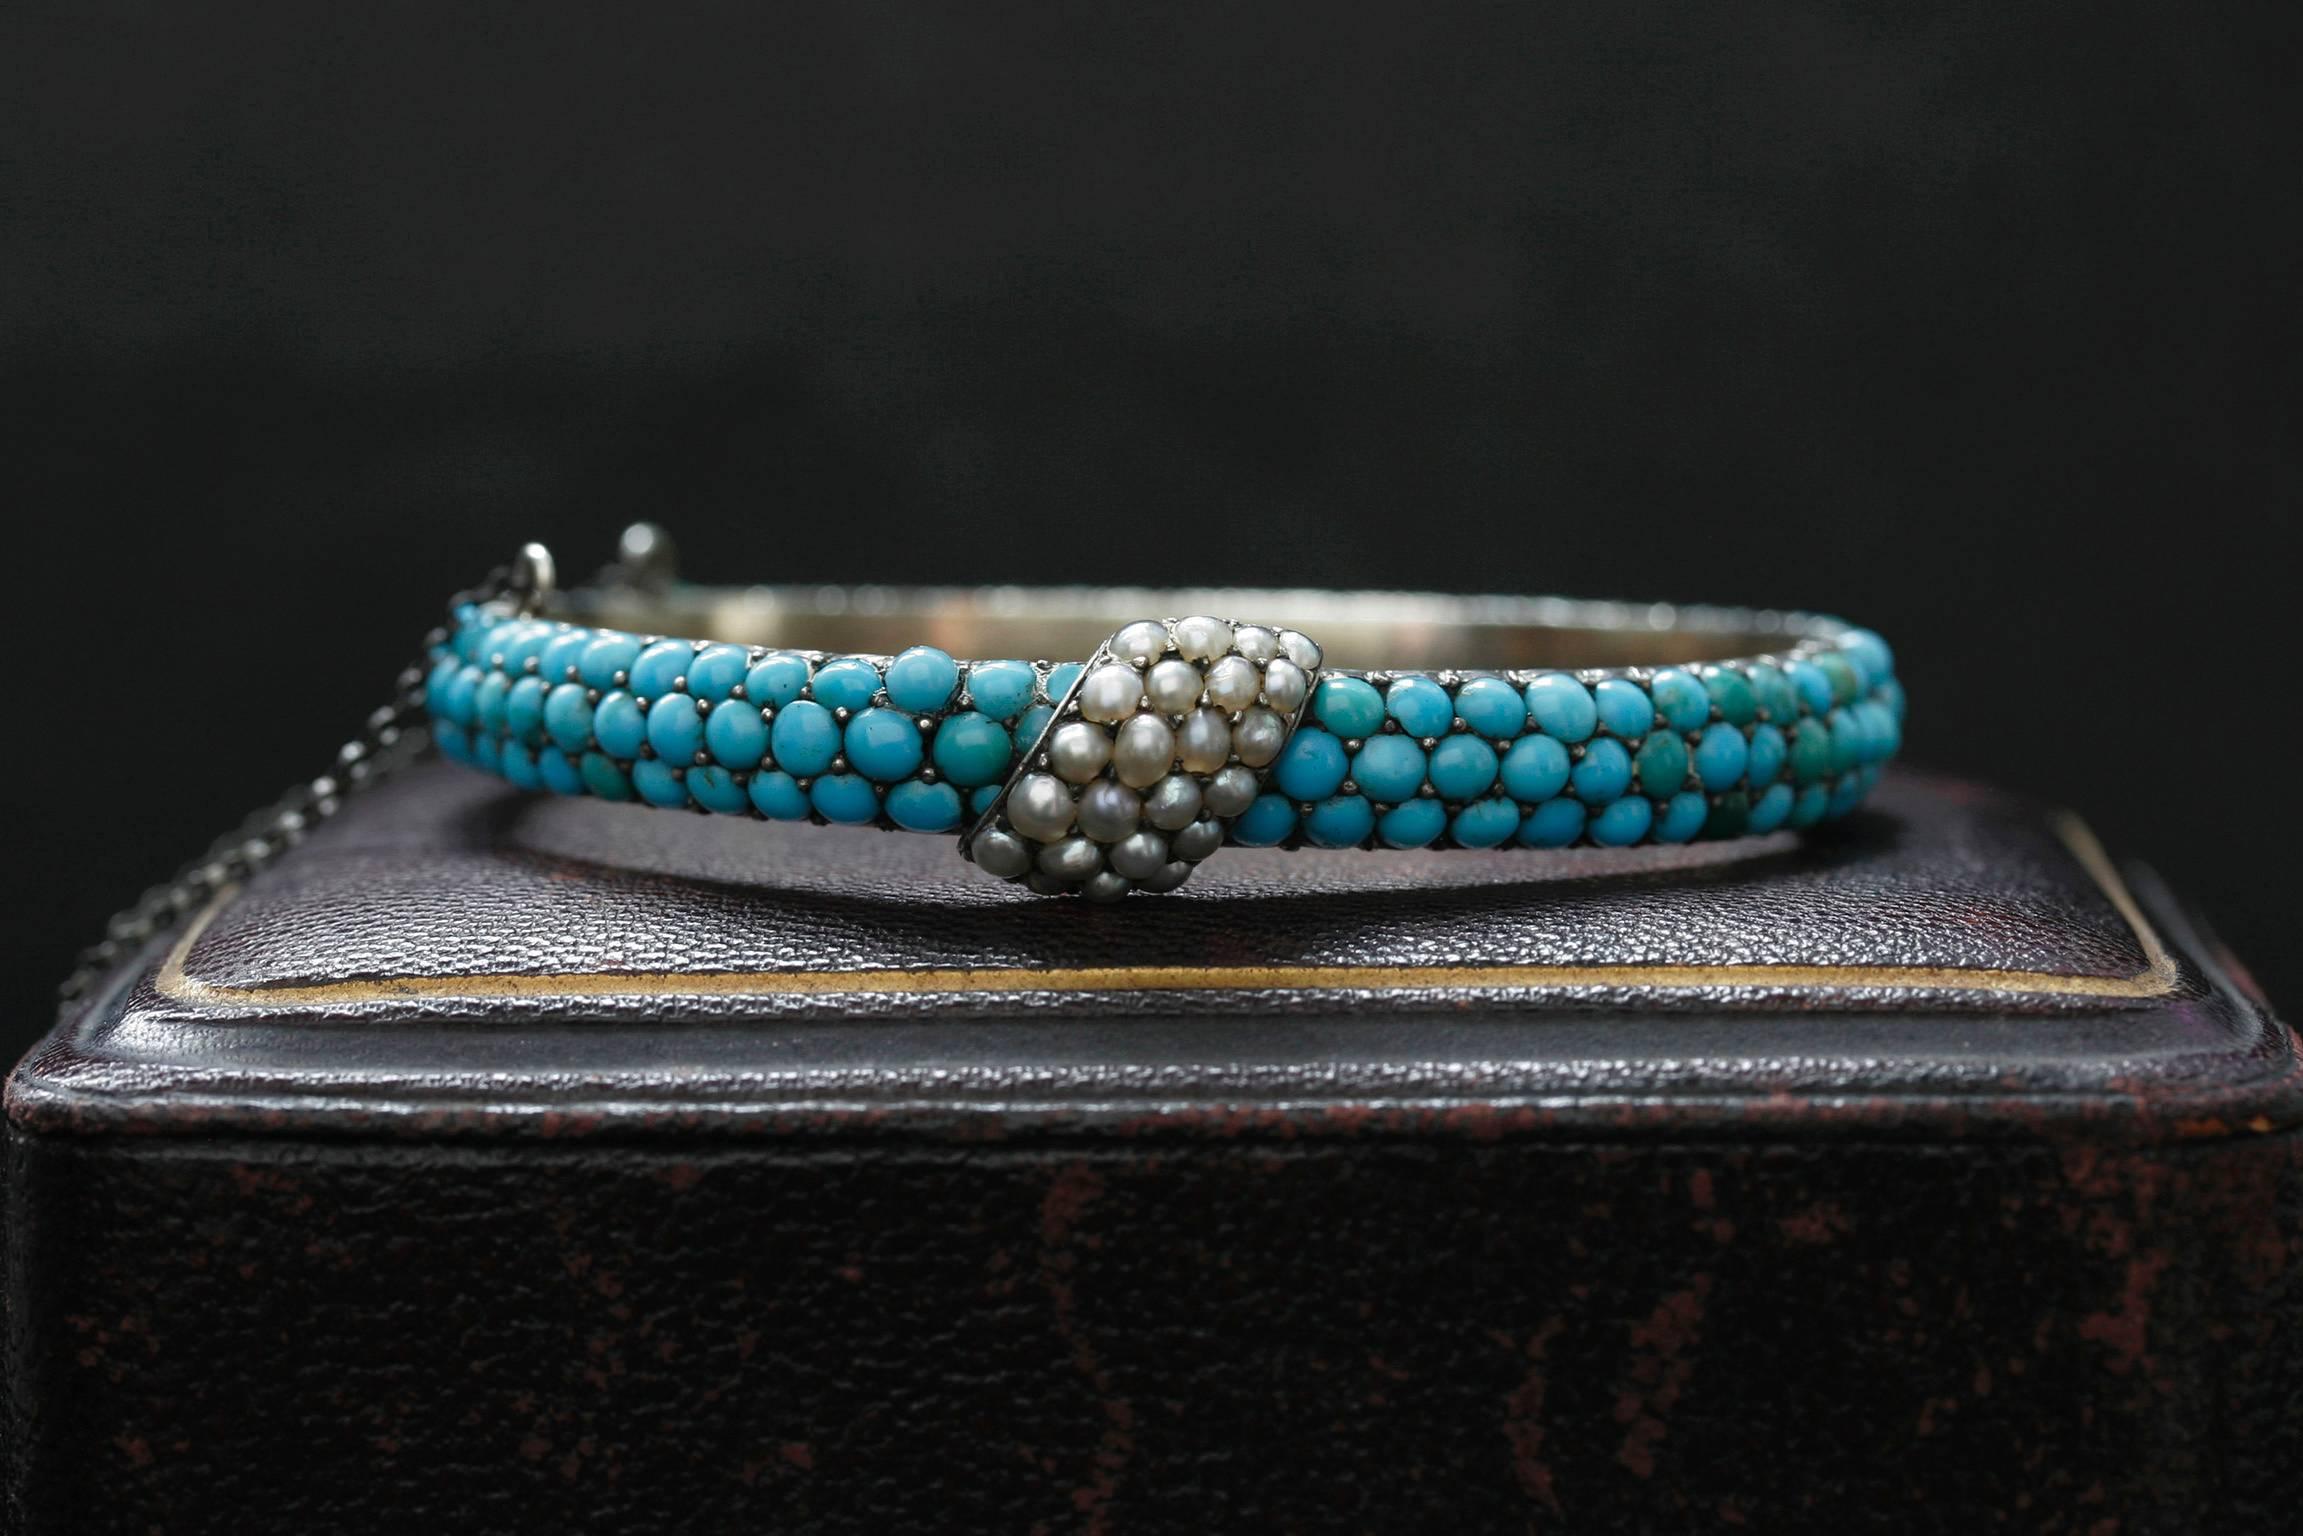 Beautifully made Victorian bangle with Persian turquoises and seed pearls laid over sterling silver. Simple and elegant in design, yet having stones continue all the way around the back gives it a fancier look. The bangle has a sterling silver